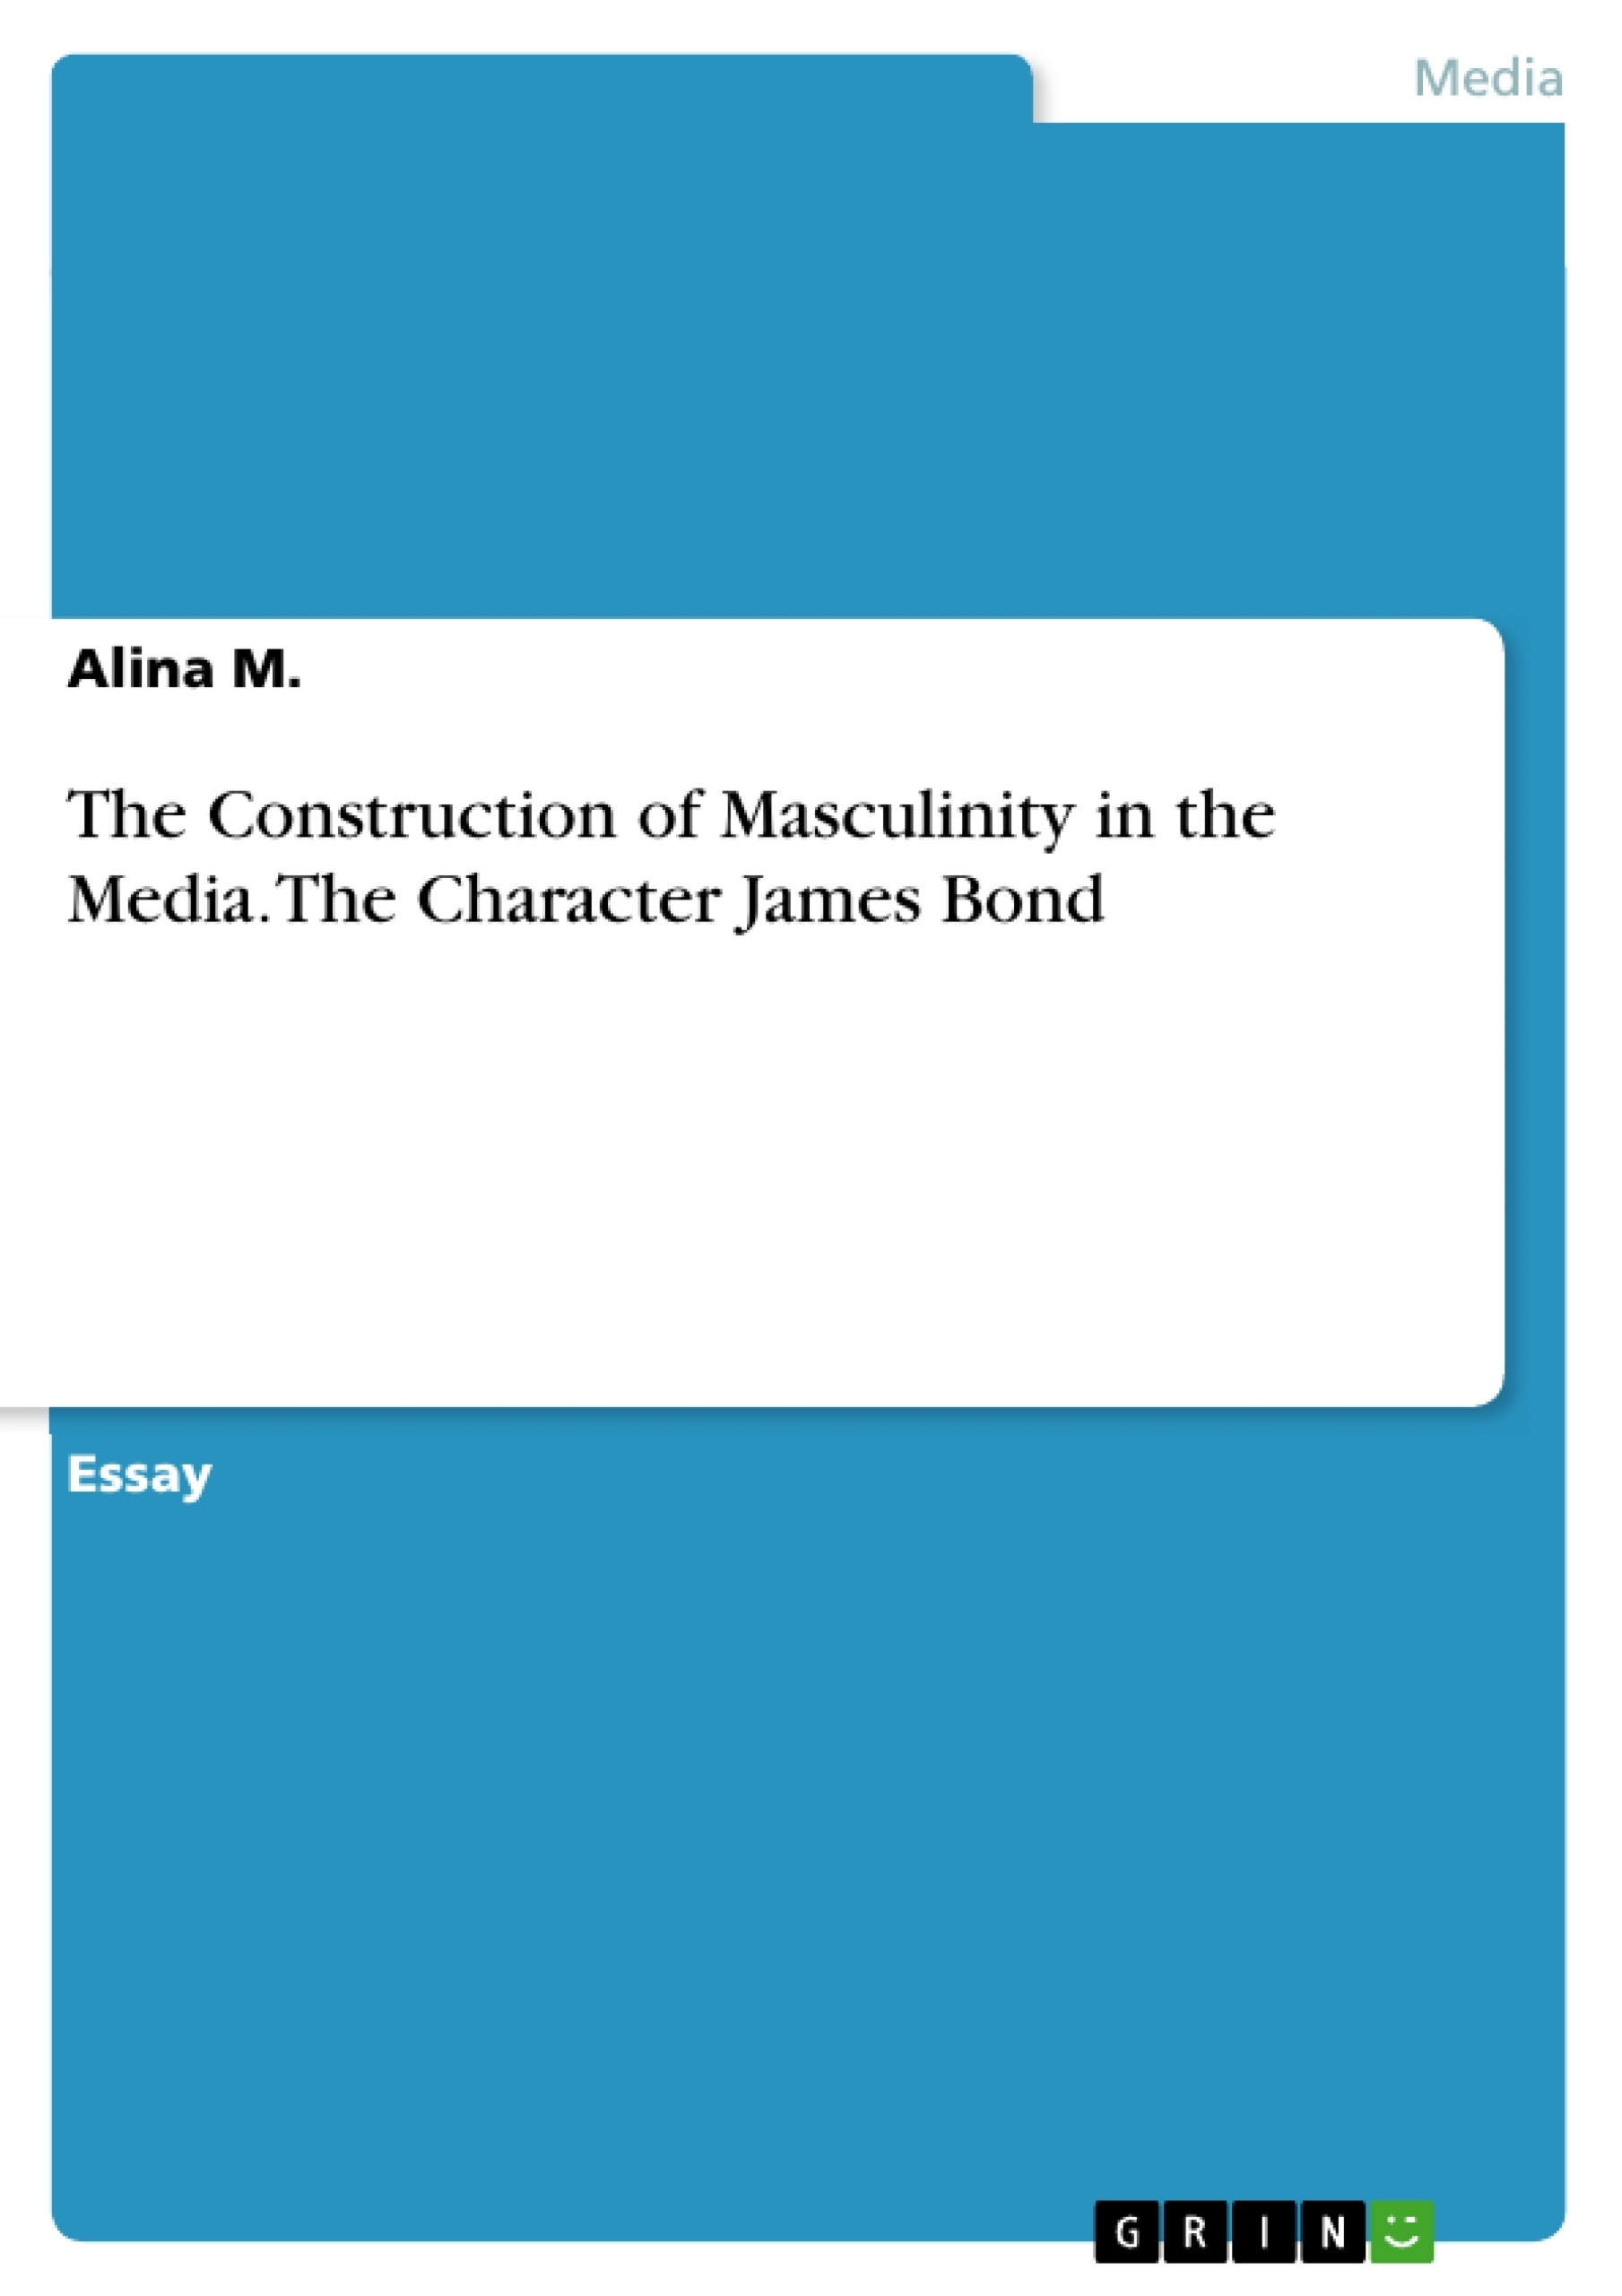 Title: The Construction of Masculinity in the Media. The Character James Bond